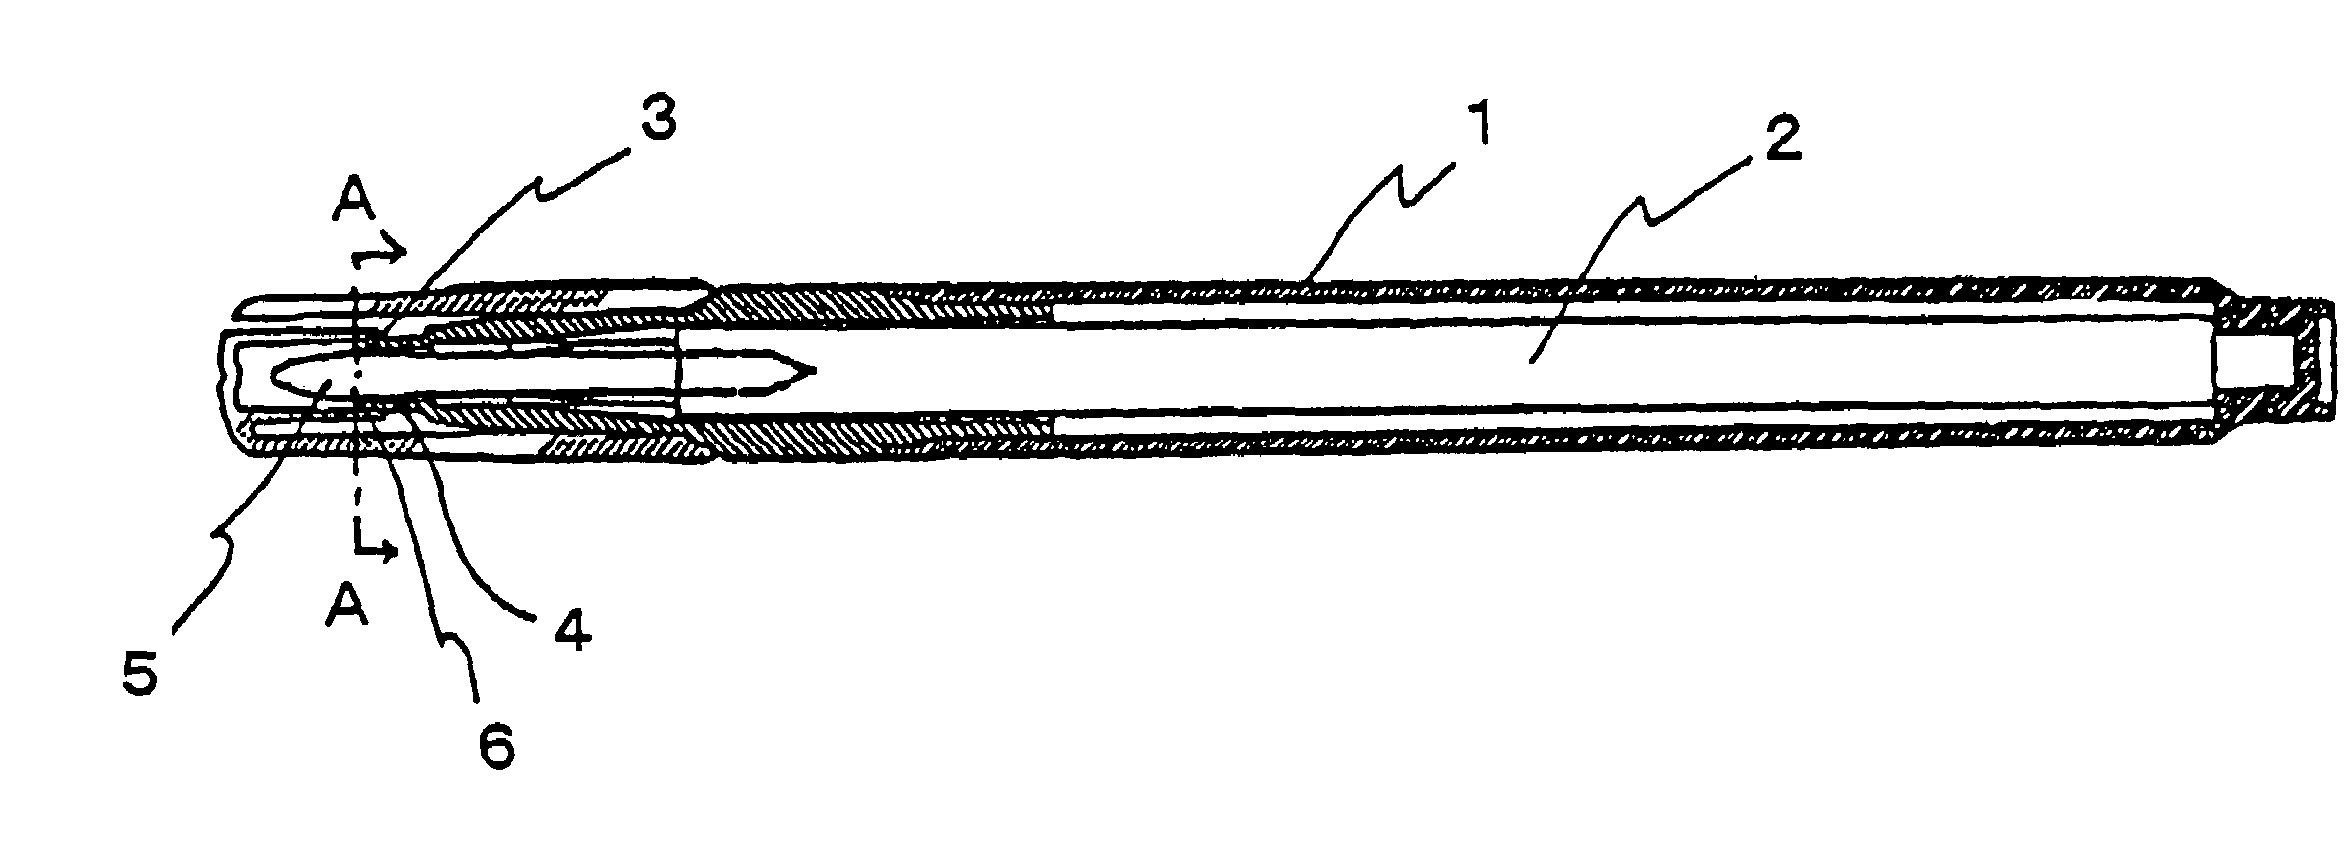 Water-based pigment-containing ink composition for central core type marking pen